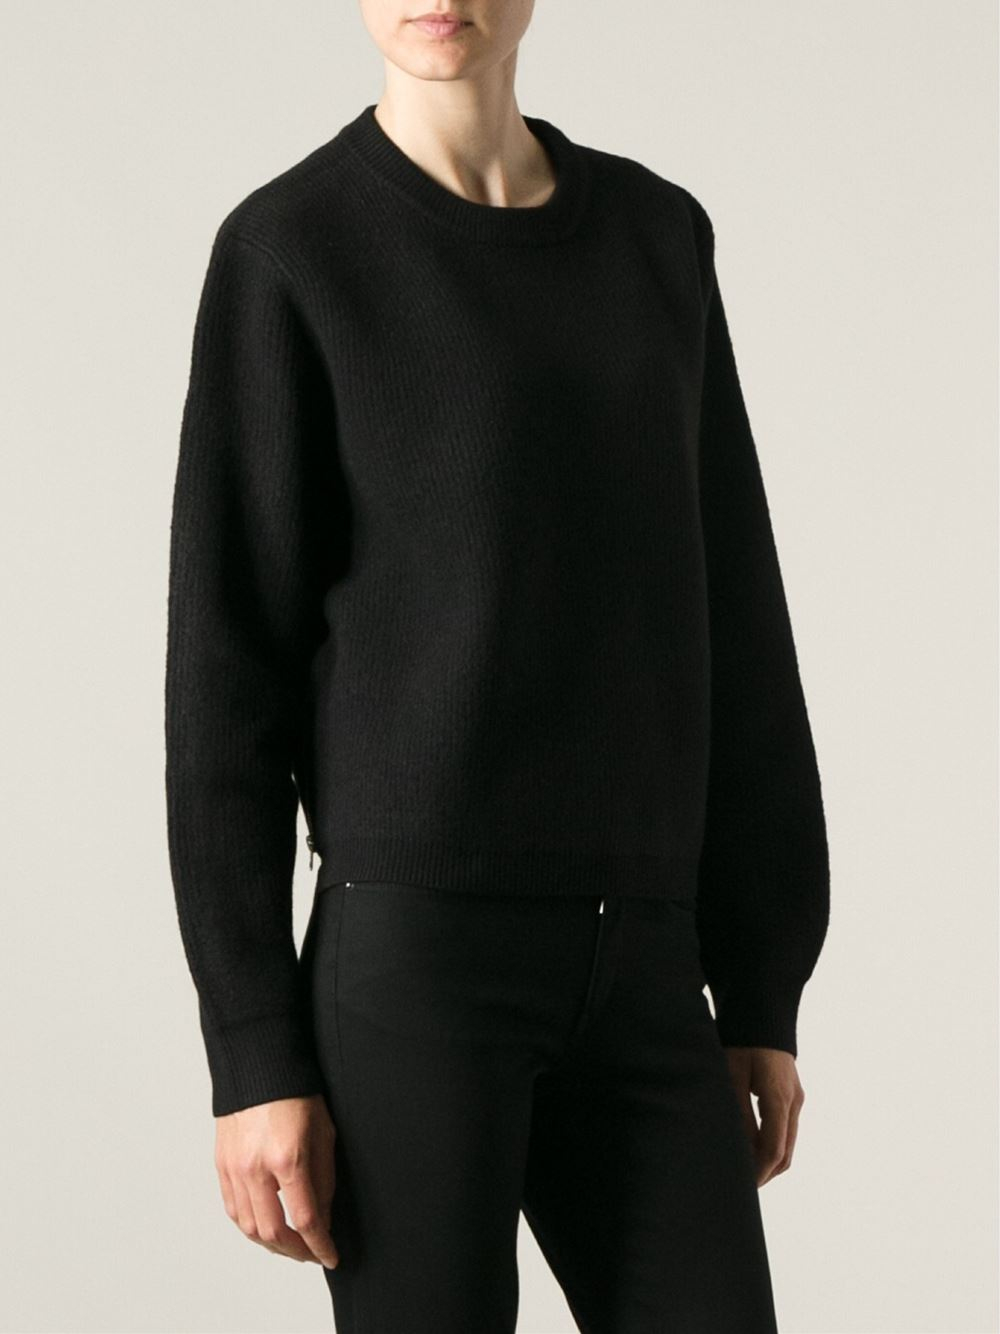 Acne Studios Misty Boiled Ribbed Sweater in Black - Lyst